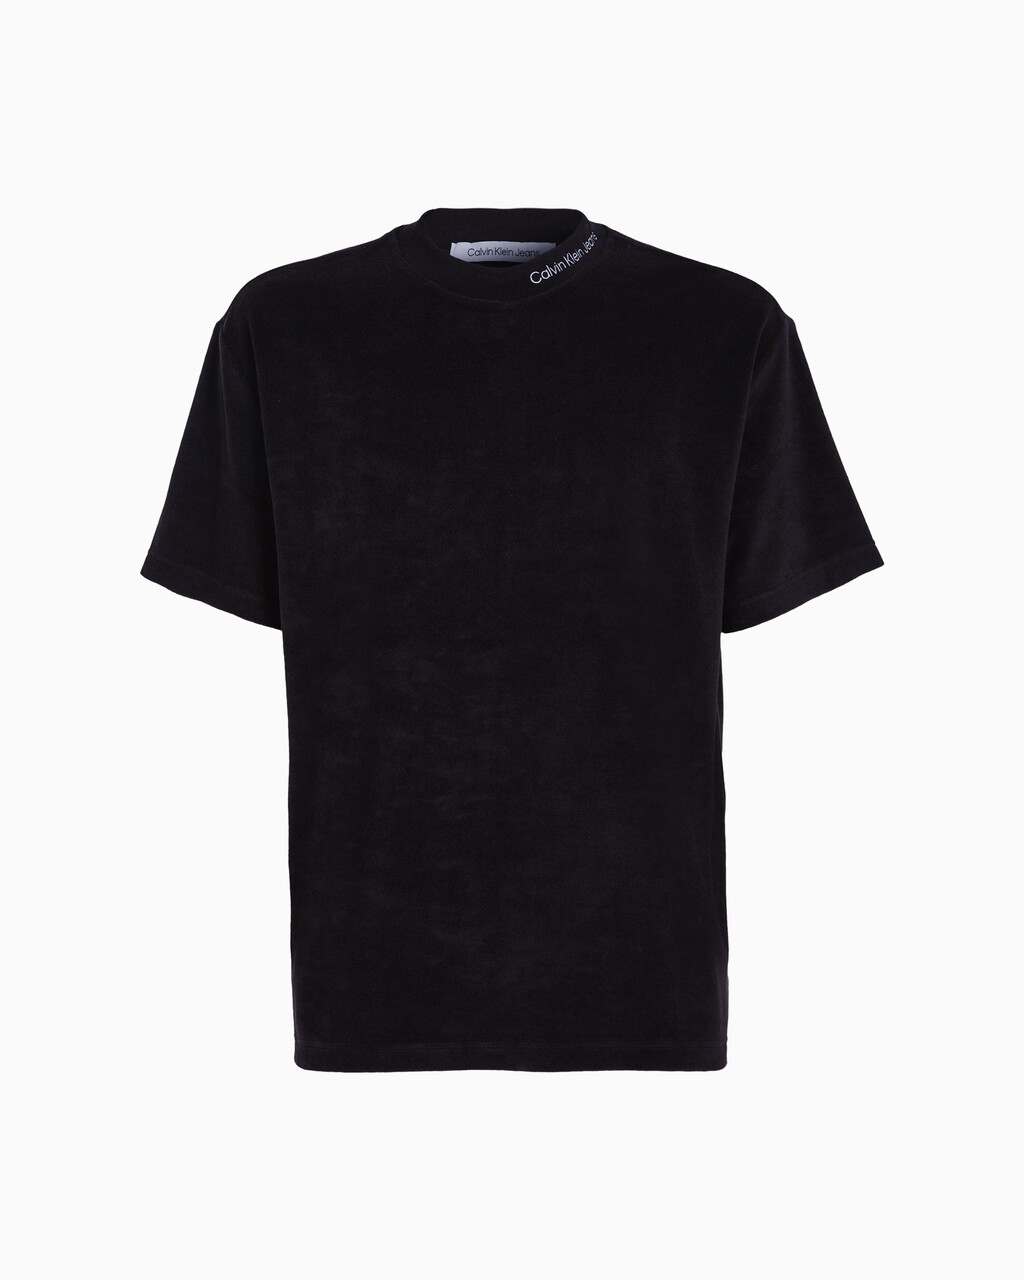 Relaxed Towelling T-Shirt, Ck Black, hi-res